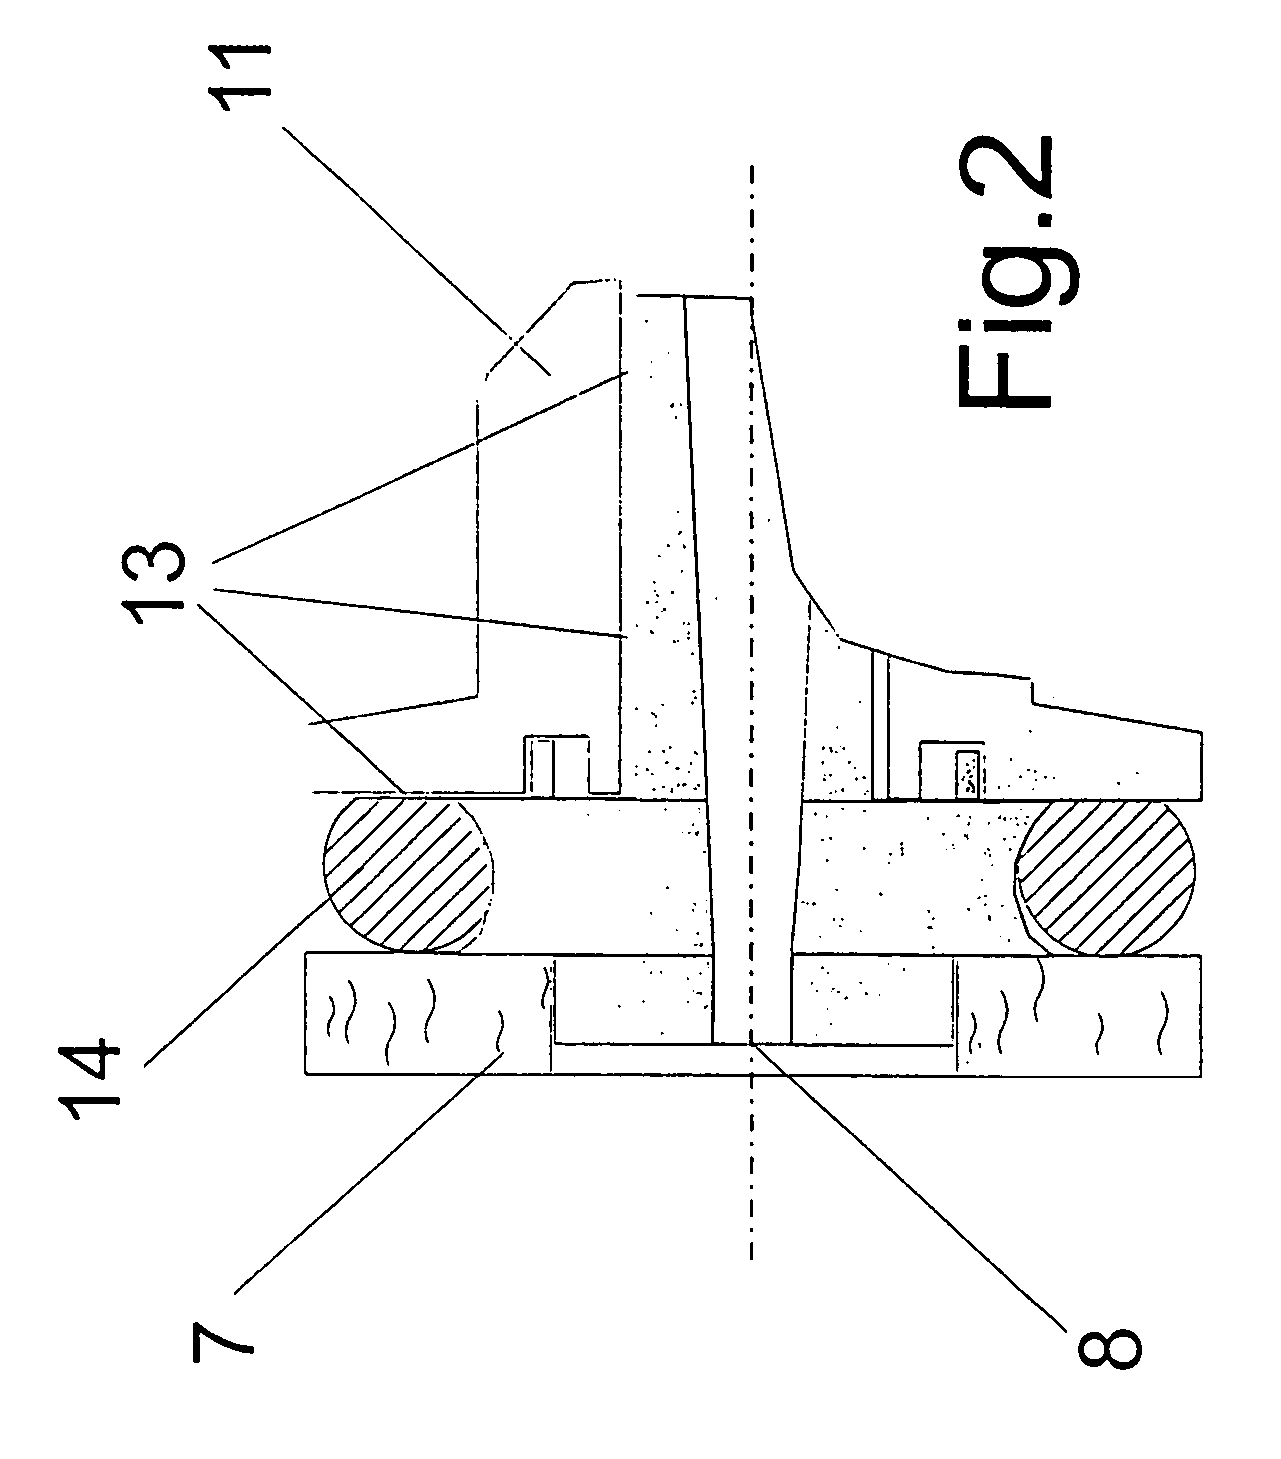 Channel spark source for generating a stable focused electron beam